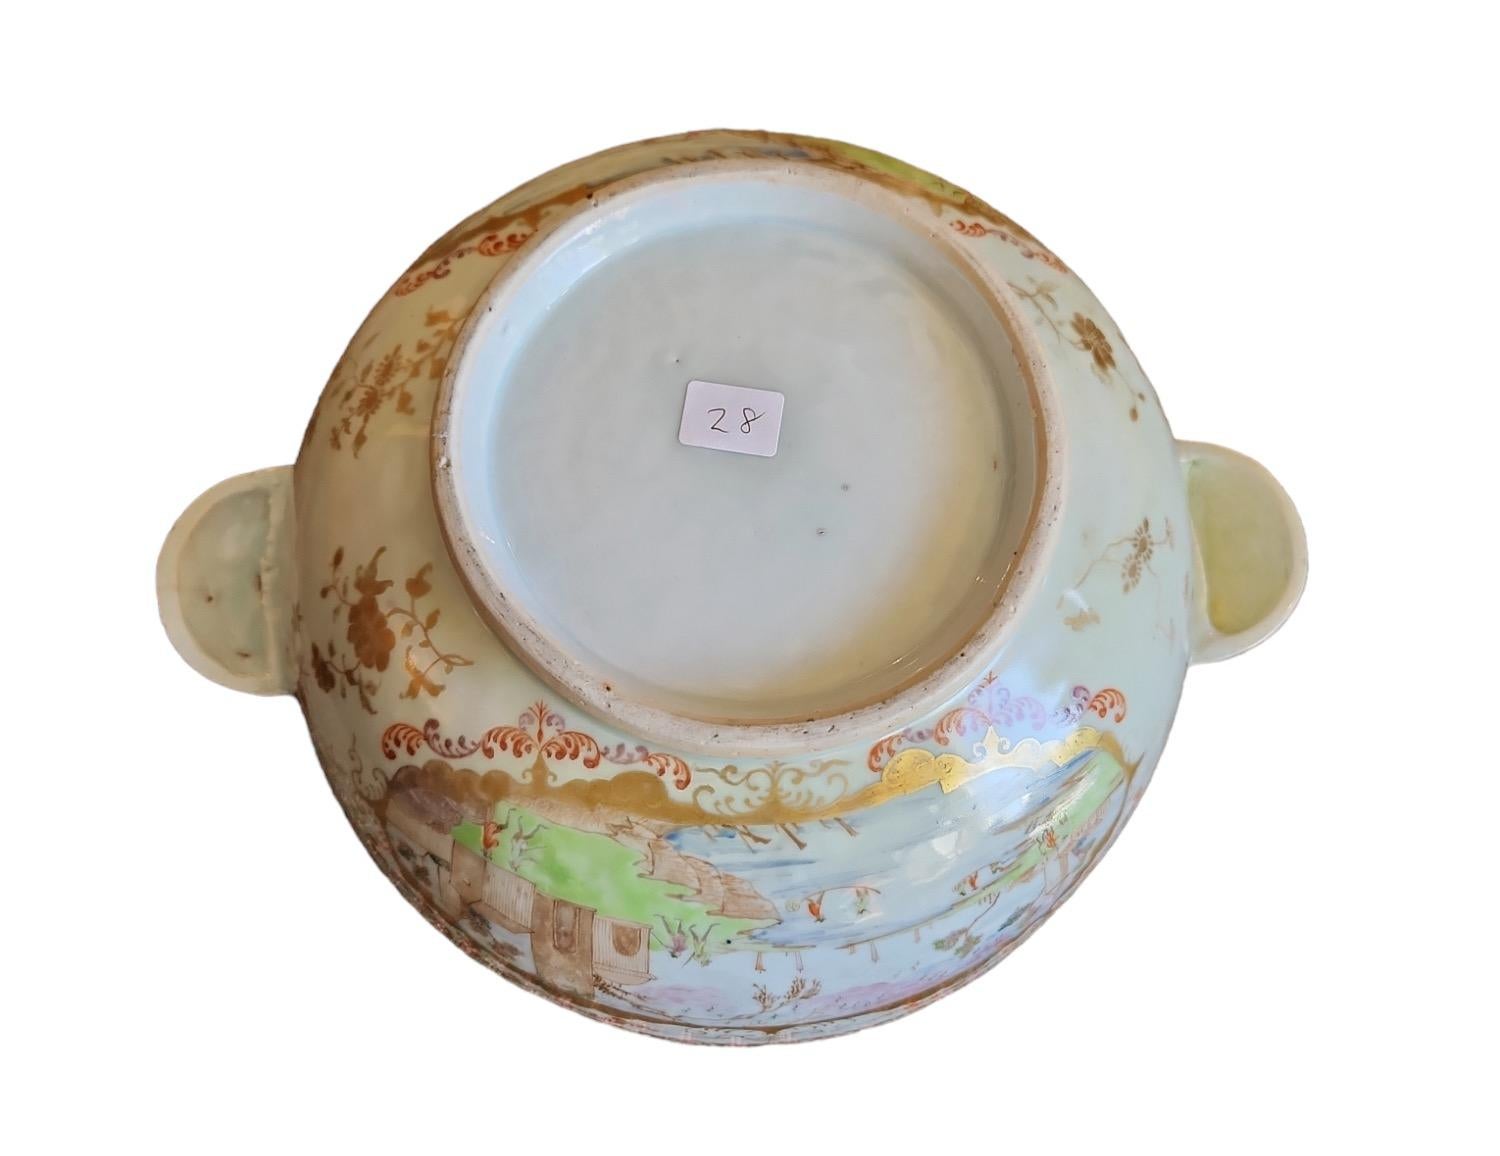 Rare Chinese Export Porcelain Covered Tureen In Good Condition For Sale In Los Angeles, CA